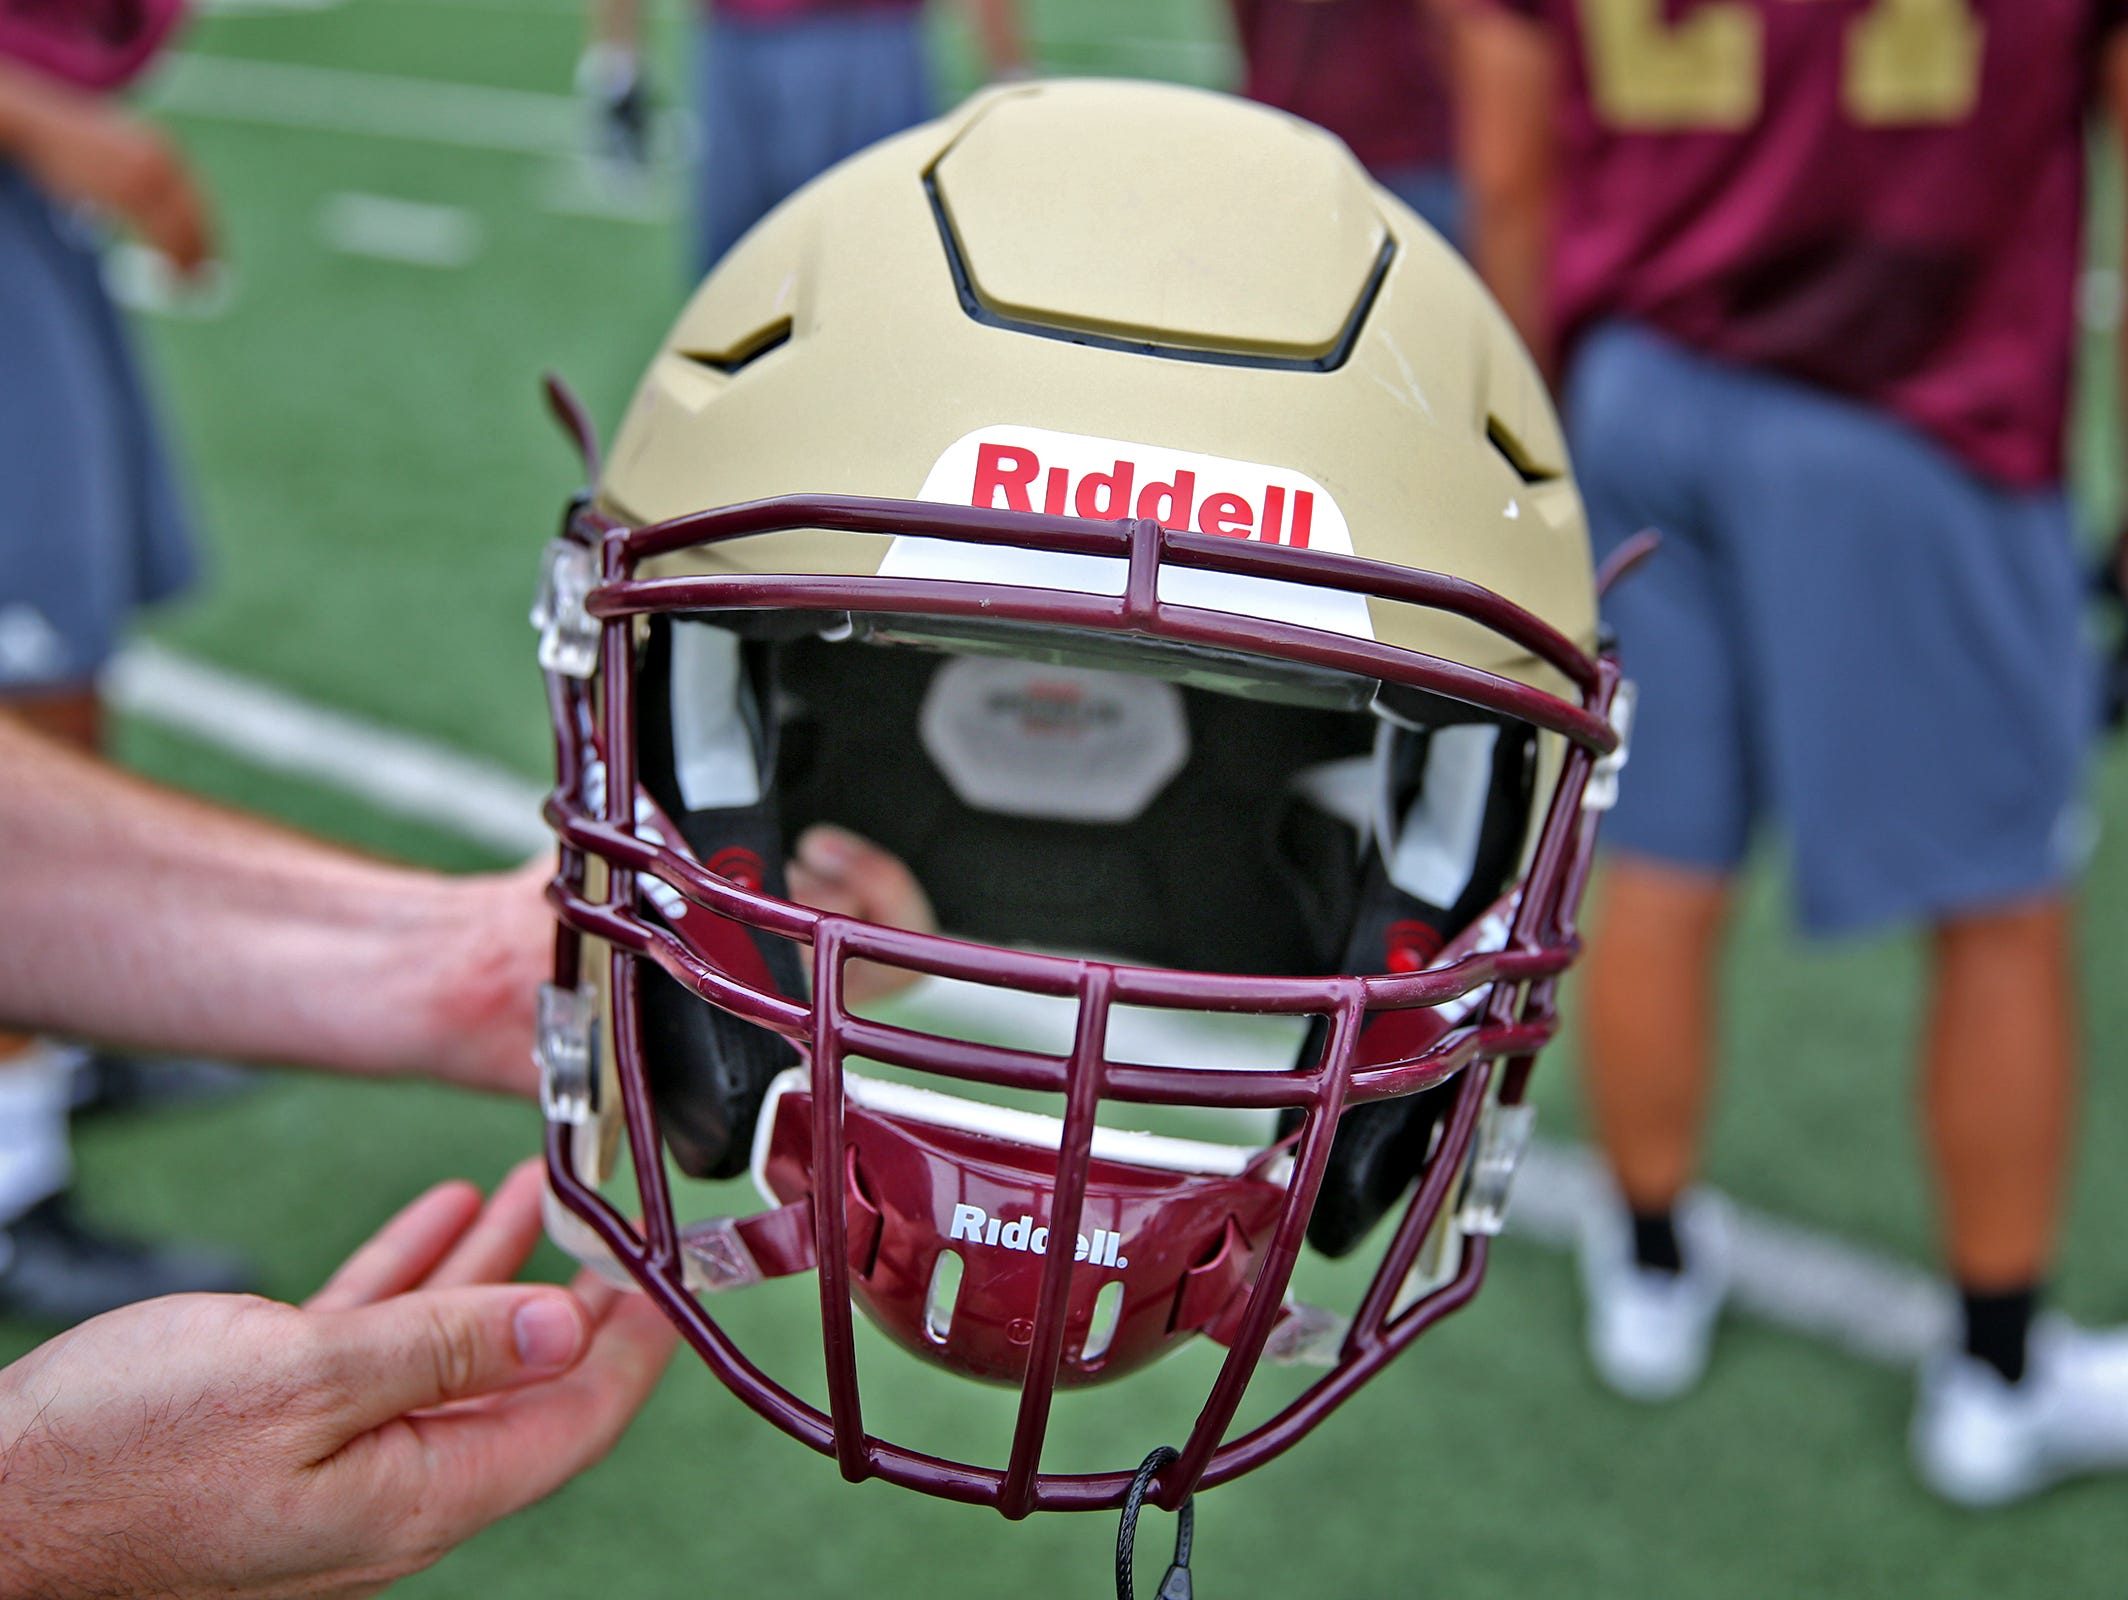 Brebeuf football players wear Riddell helmets with InSite impact monitoring system which monitors impacts as they occur for players. Under padding inside are the sensors and the power source. If a player gets hit at a critical level, it will send an alert to the monitoring athletic trainer so that concussion protocol can be initiated. This is the first year that players will use the helmets.